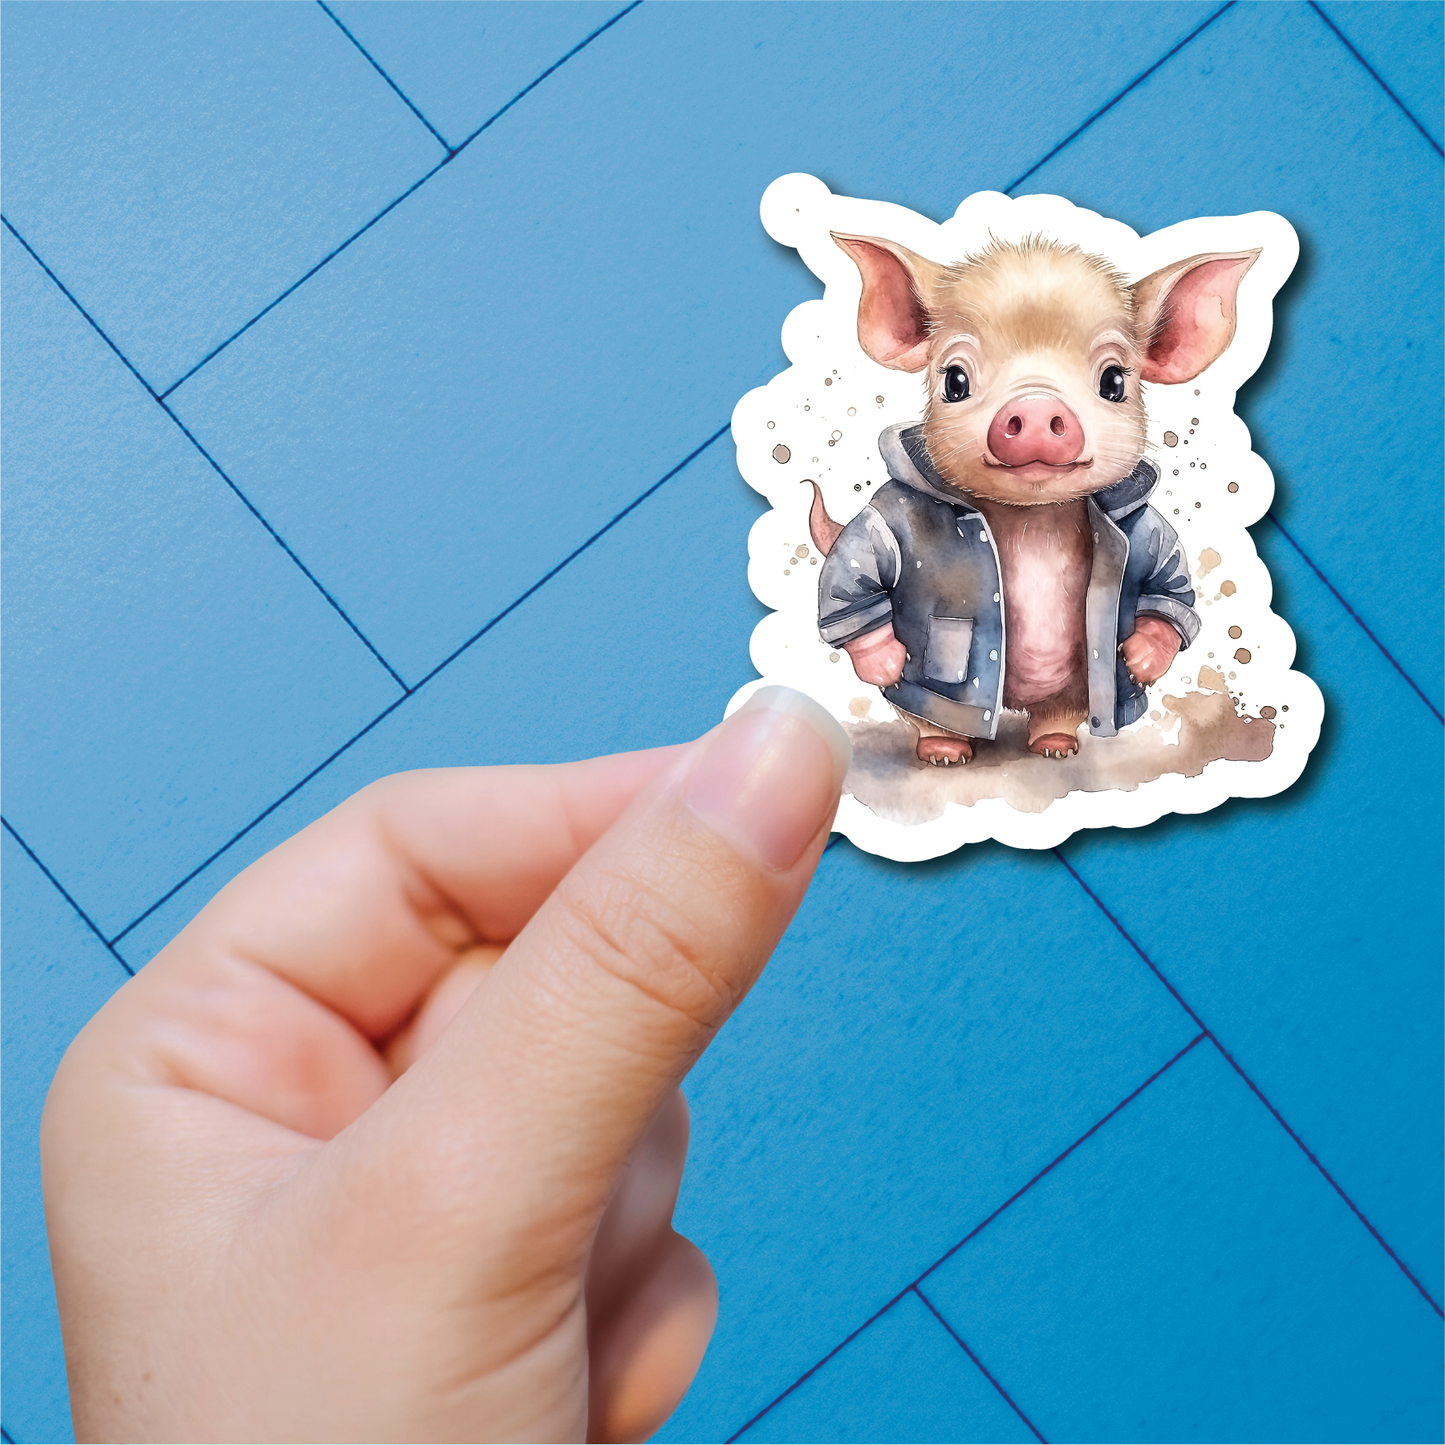 Baby Farm Animals - Full Color Vinyl Stickers (SHIPS IN 3-7 BUS DAYS)